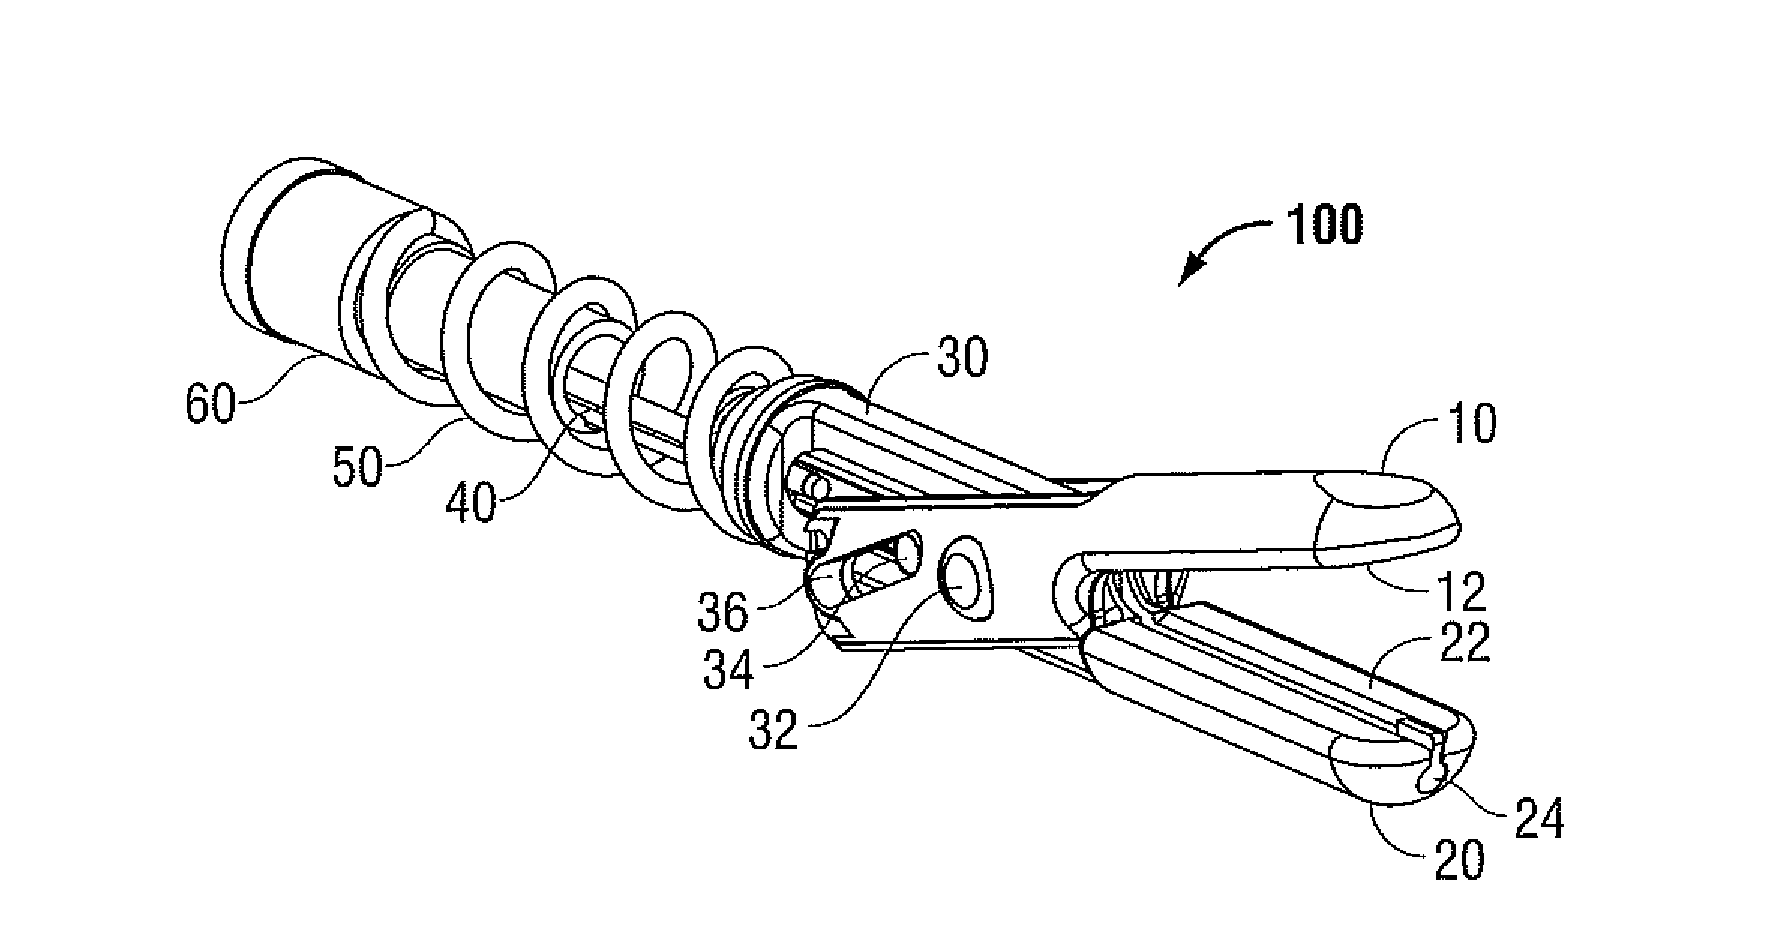 Apparatus For Performing Electrosurgical Procedures Having A Spring Mechanism Associated With The Jaw Members